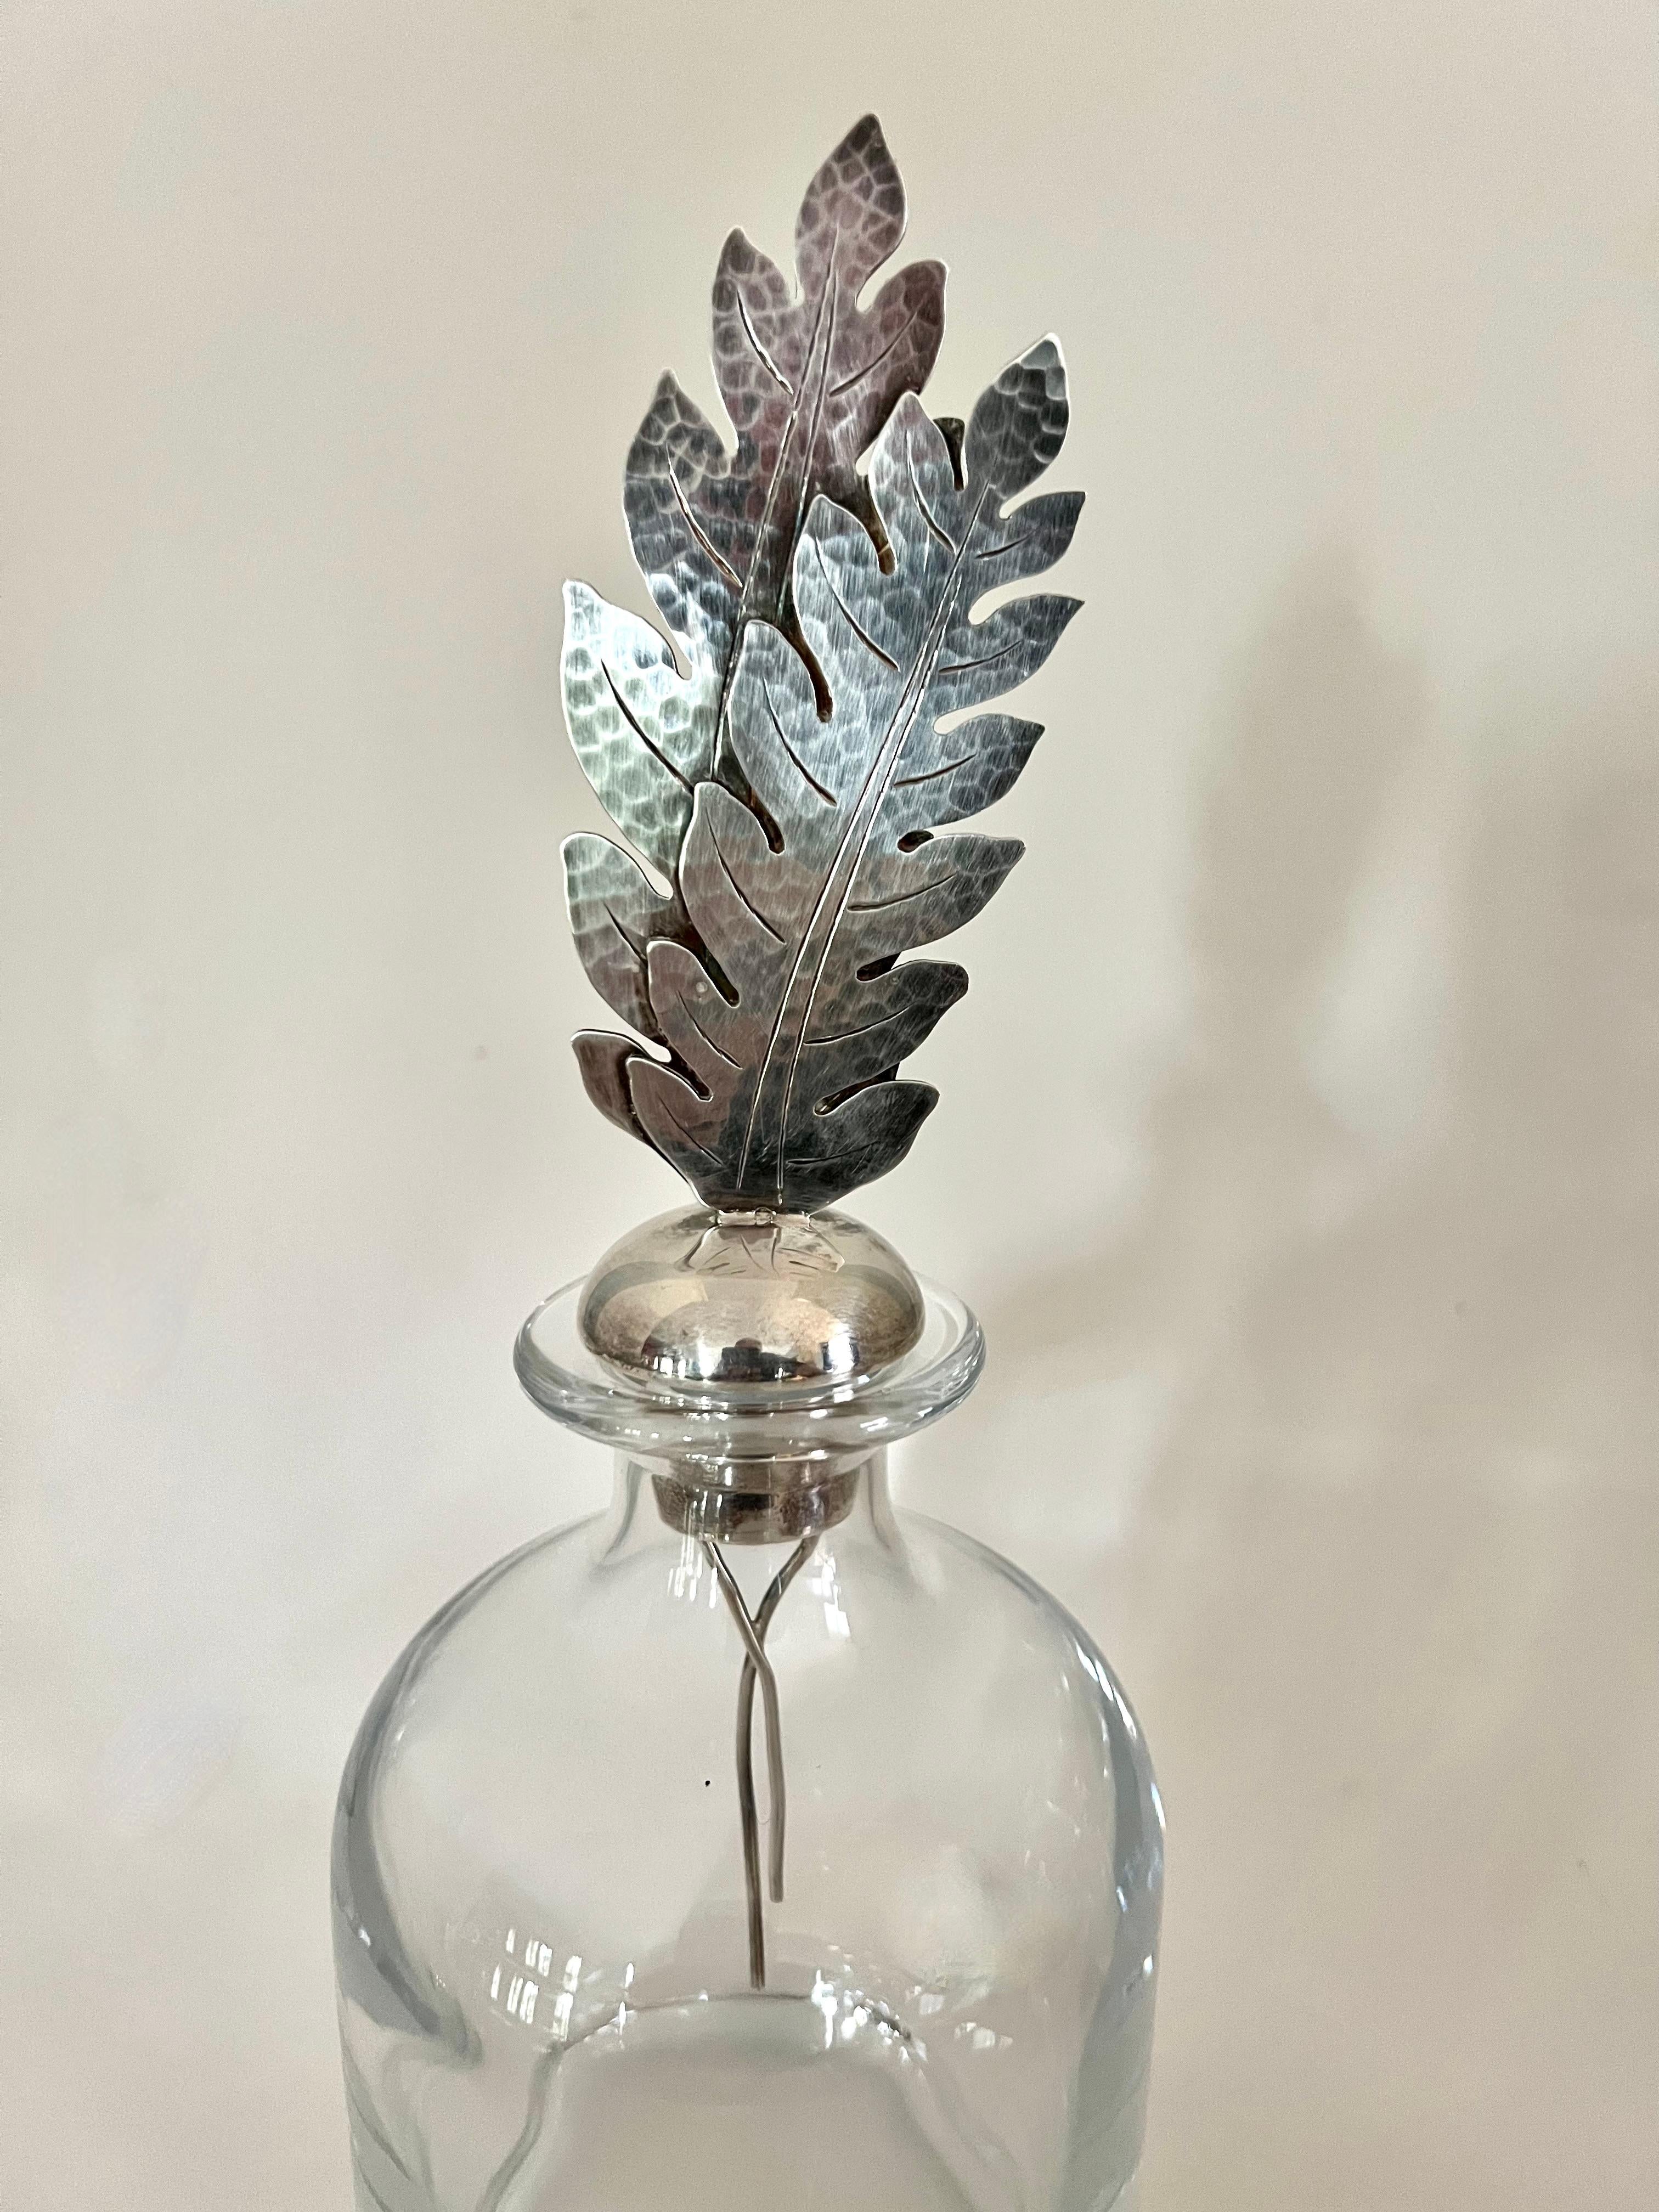 20th Century Crystal Italian Pampaloni Decanter with Sterling Silver Feather or Leaf Stopper